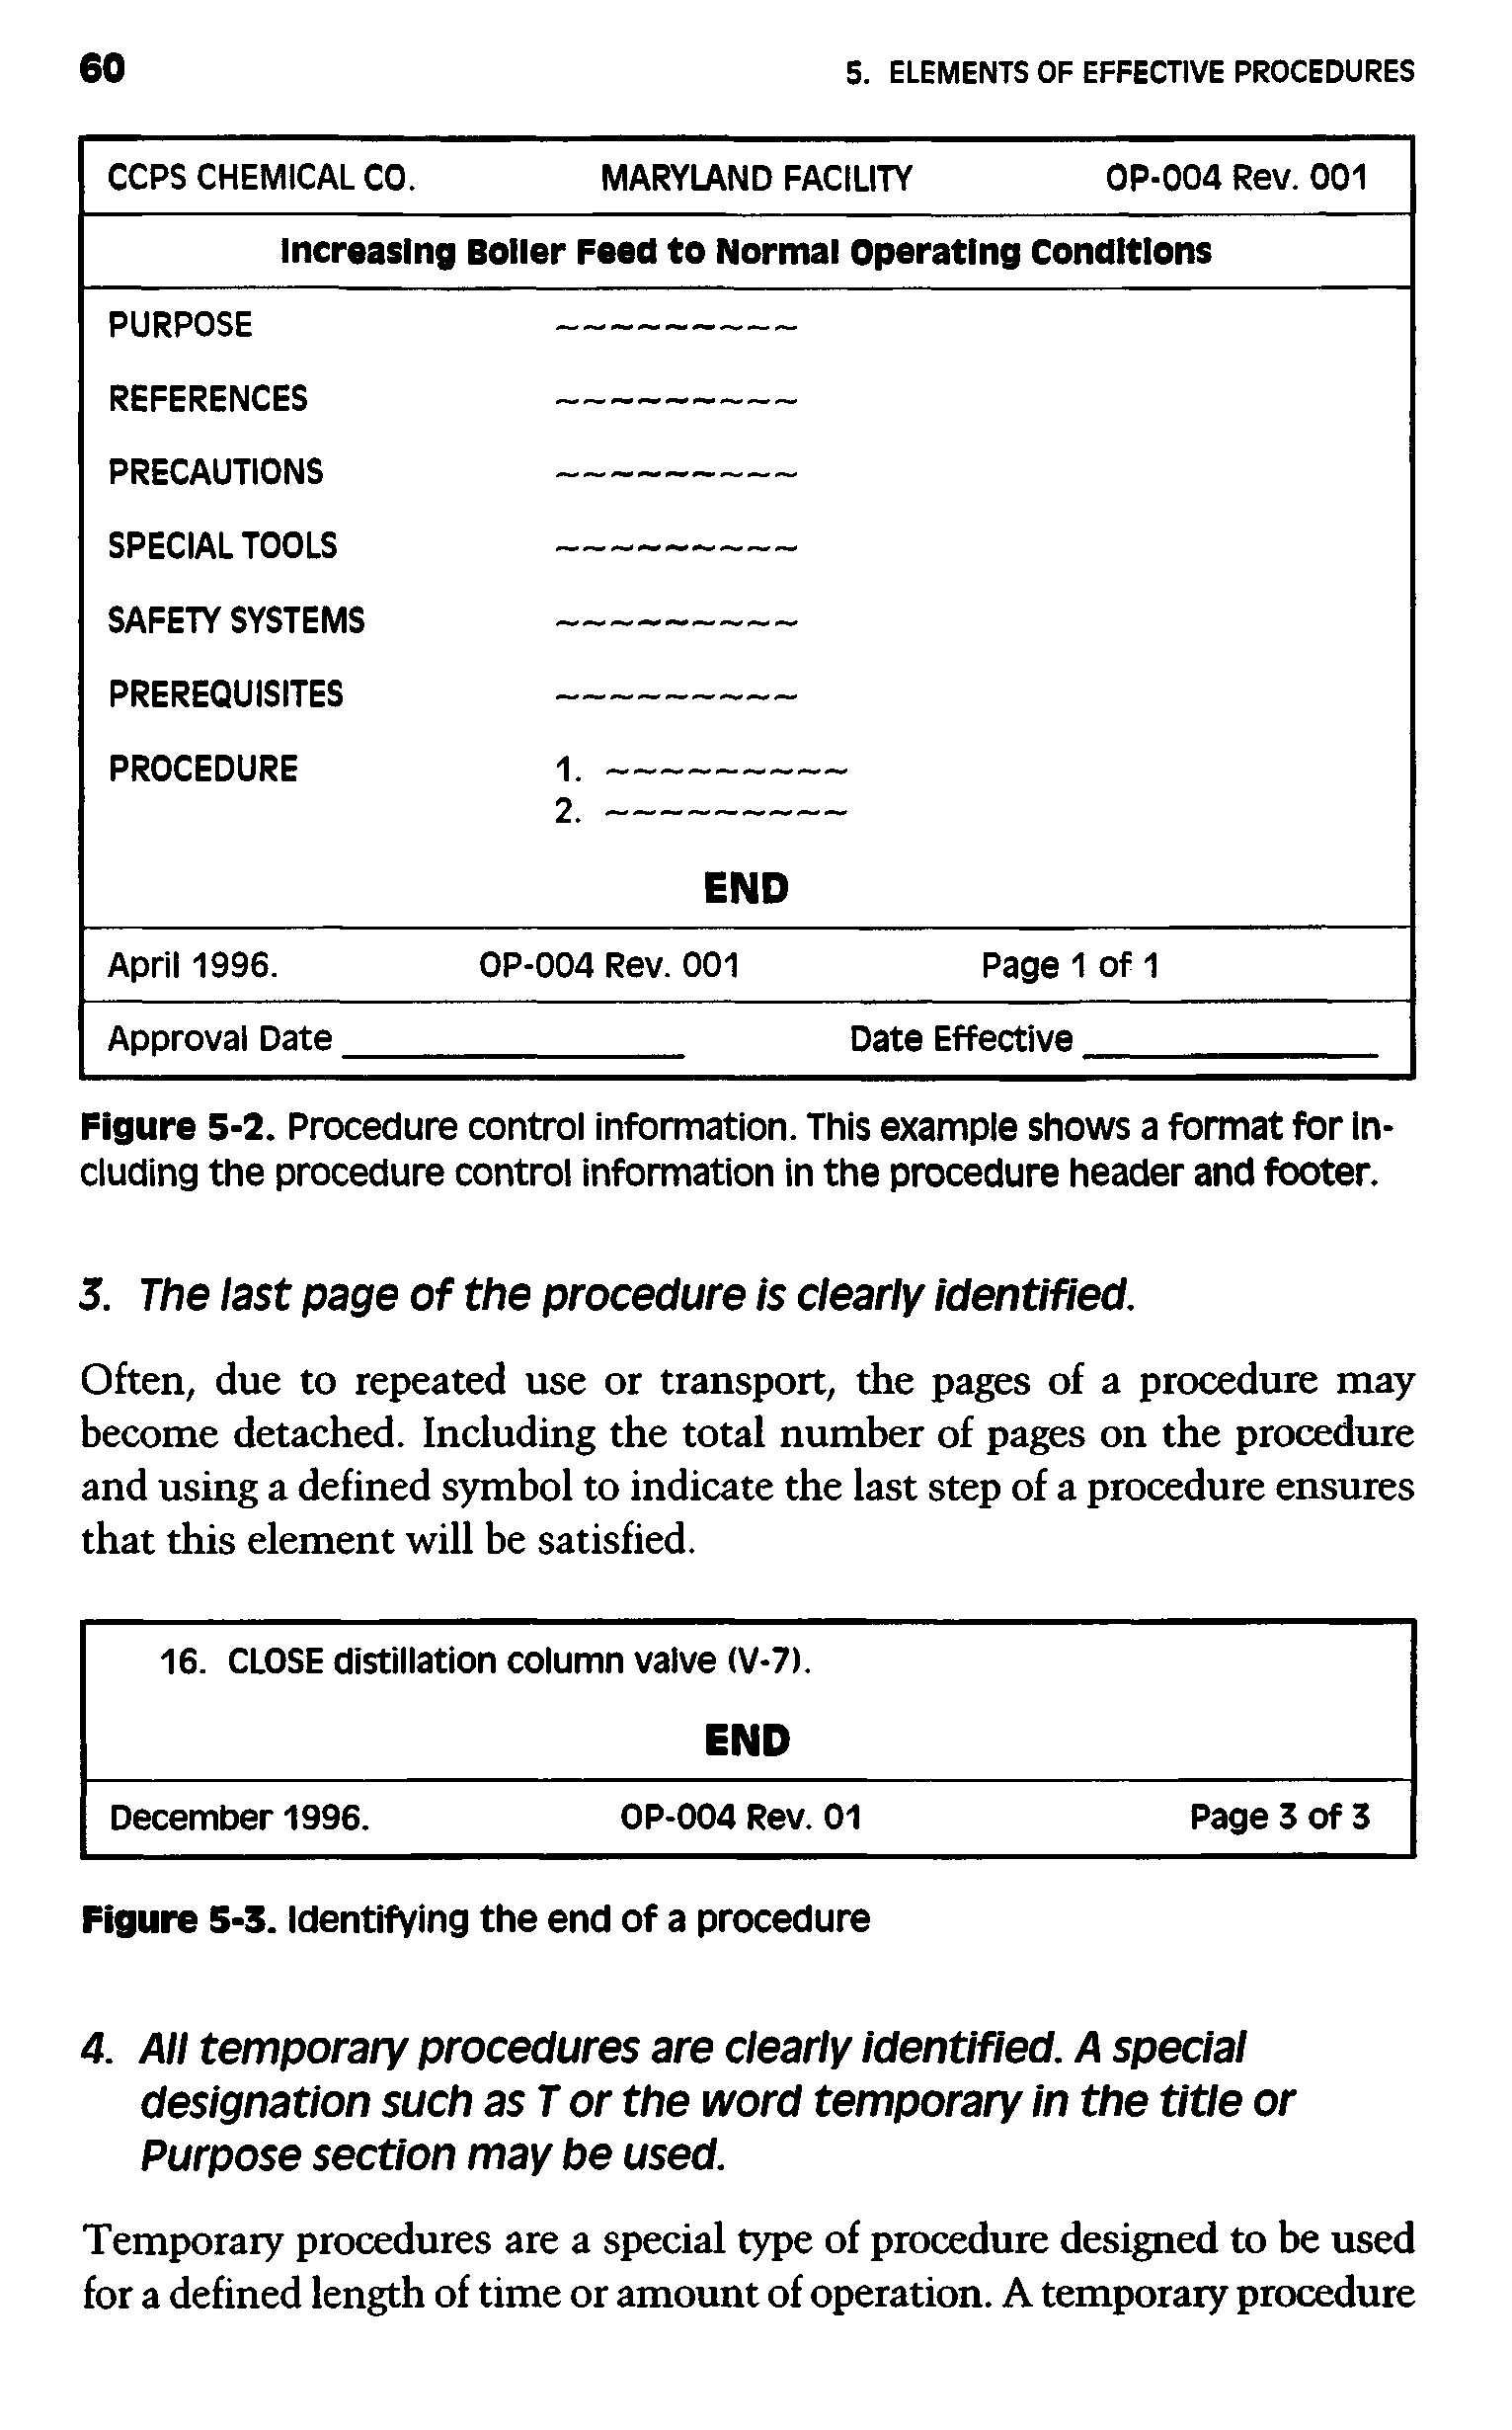 Figure 5-2. Procedure control information. This example shows a format for including the procedure control information in the procedure header and footer.